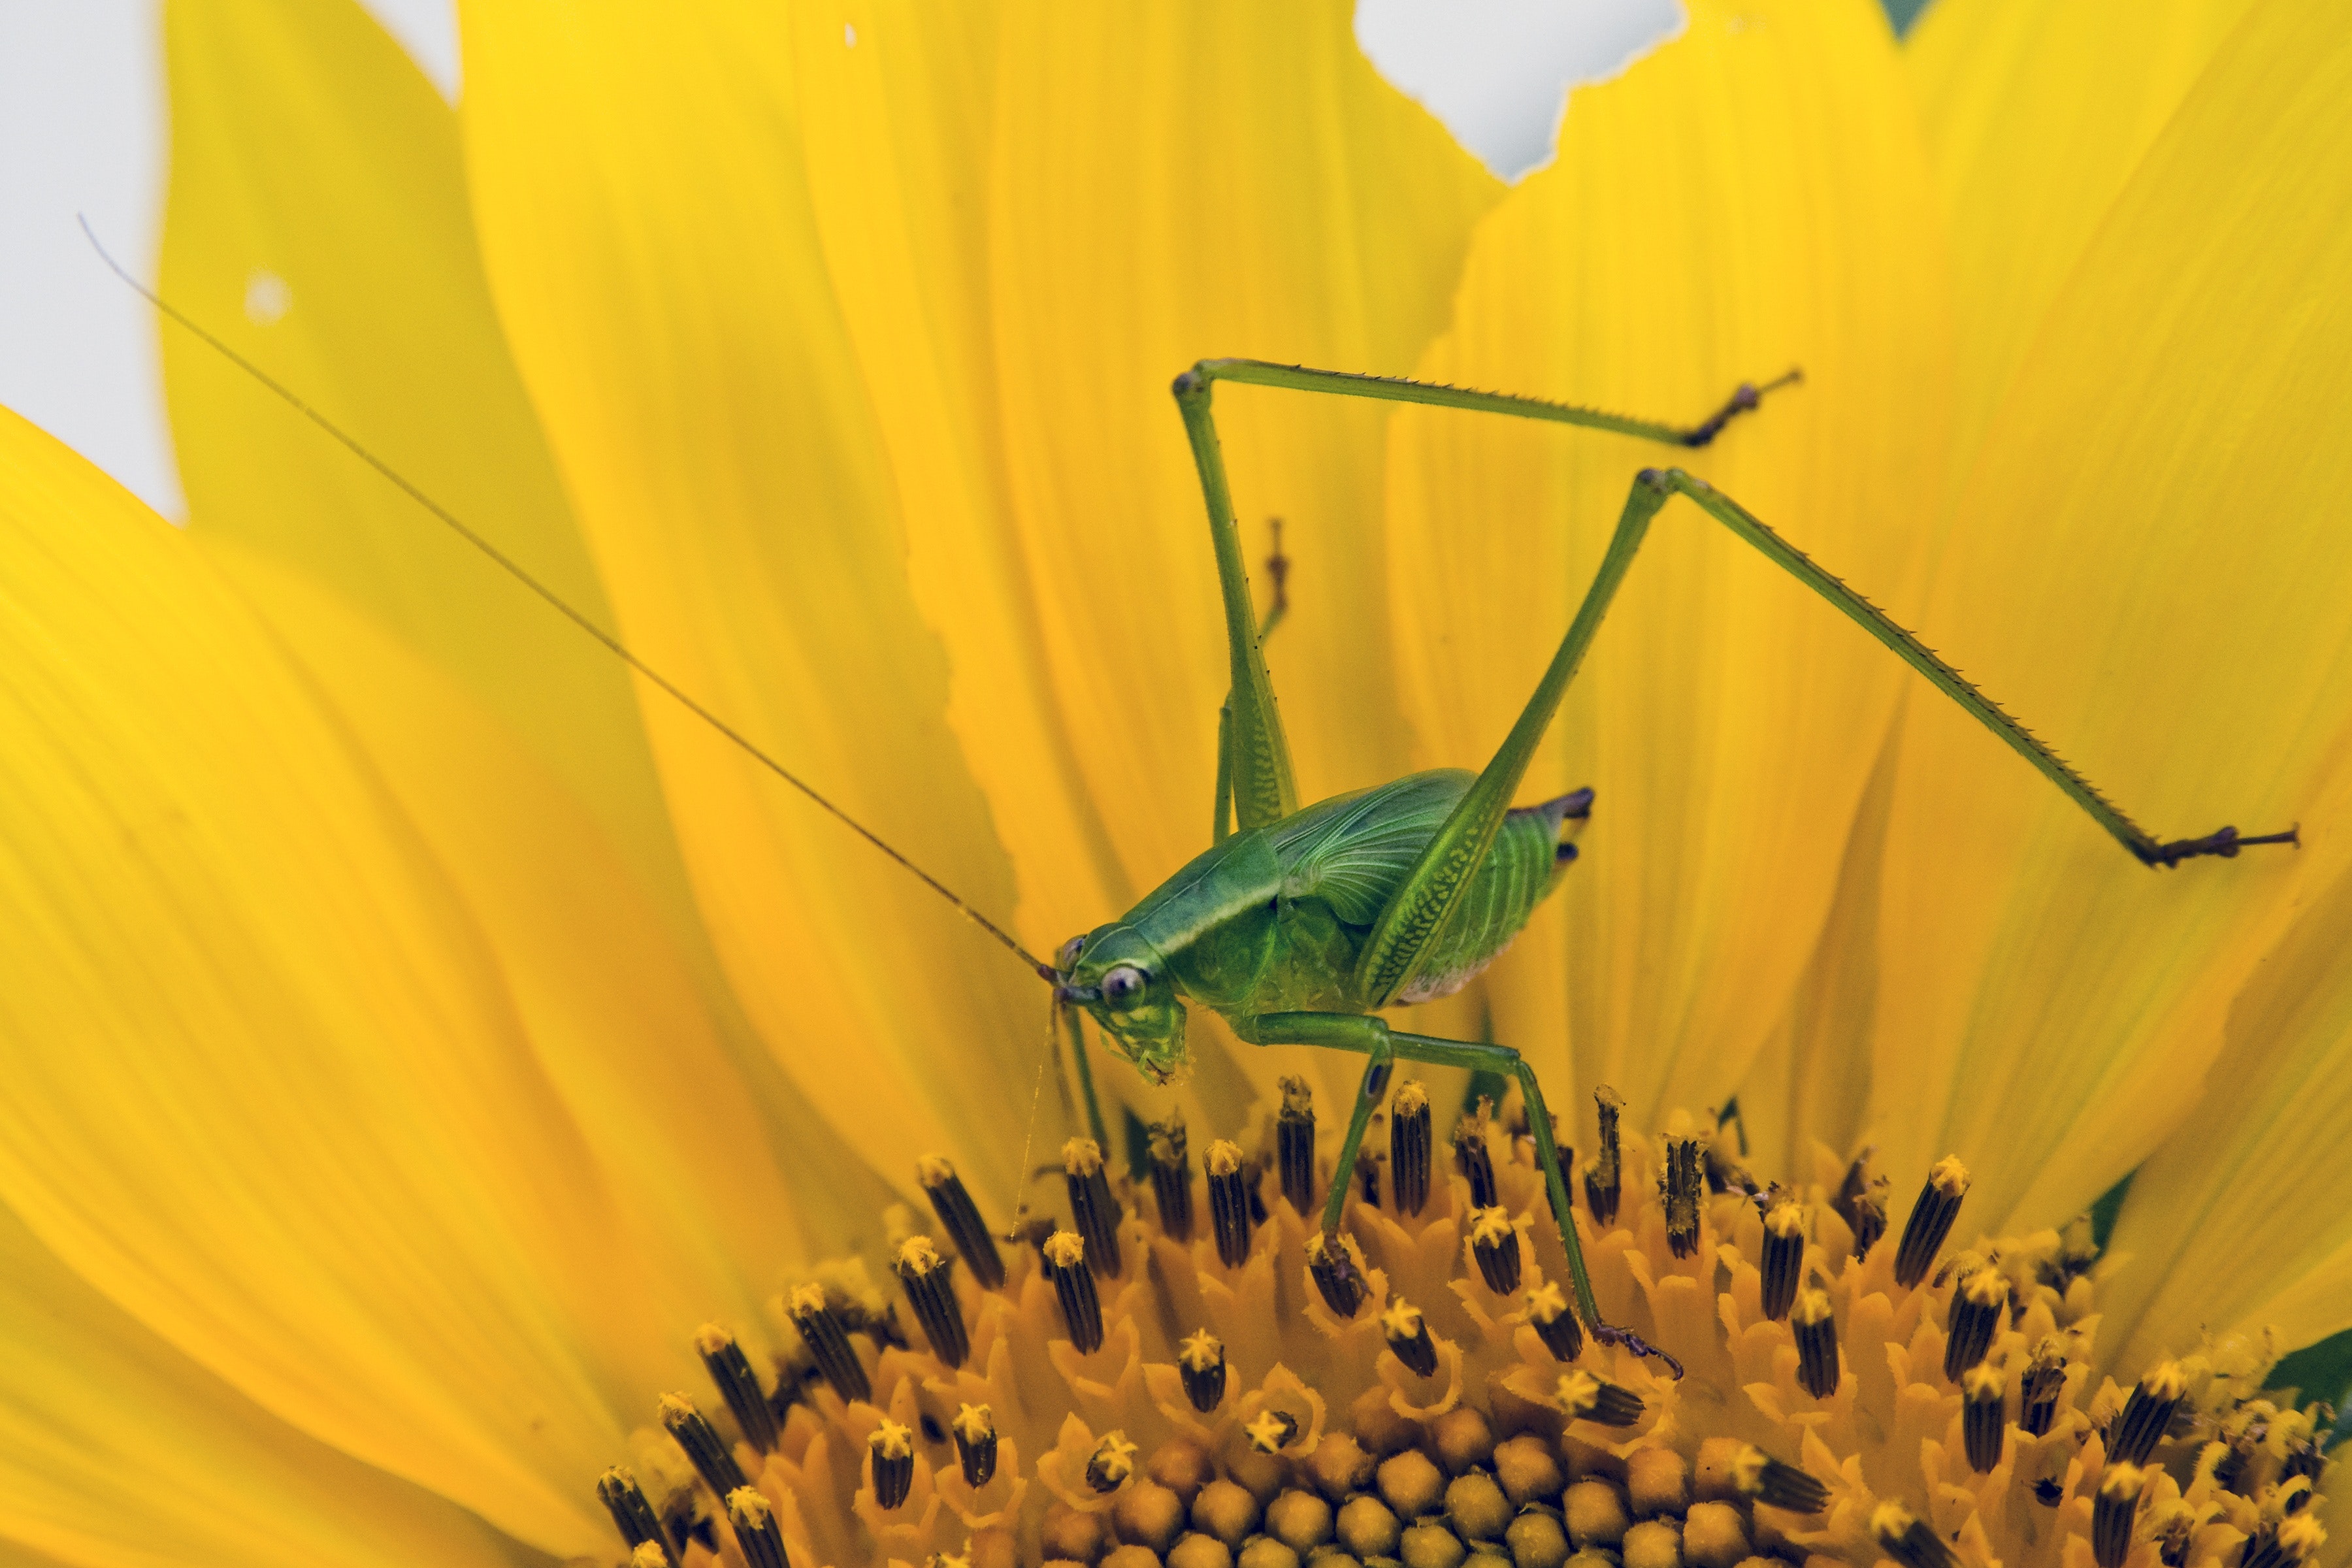 Green Grasshopper on Yellow and Black Flower, Bloom, Blossom, Close-up, Flora, HQ Photo